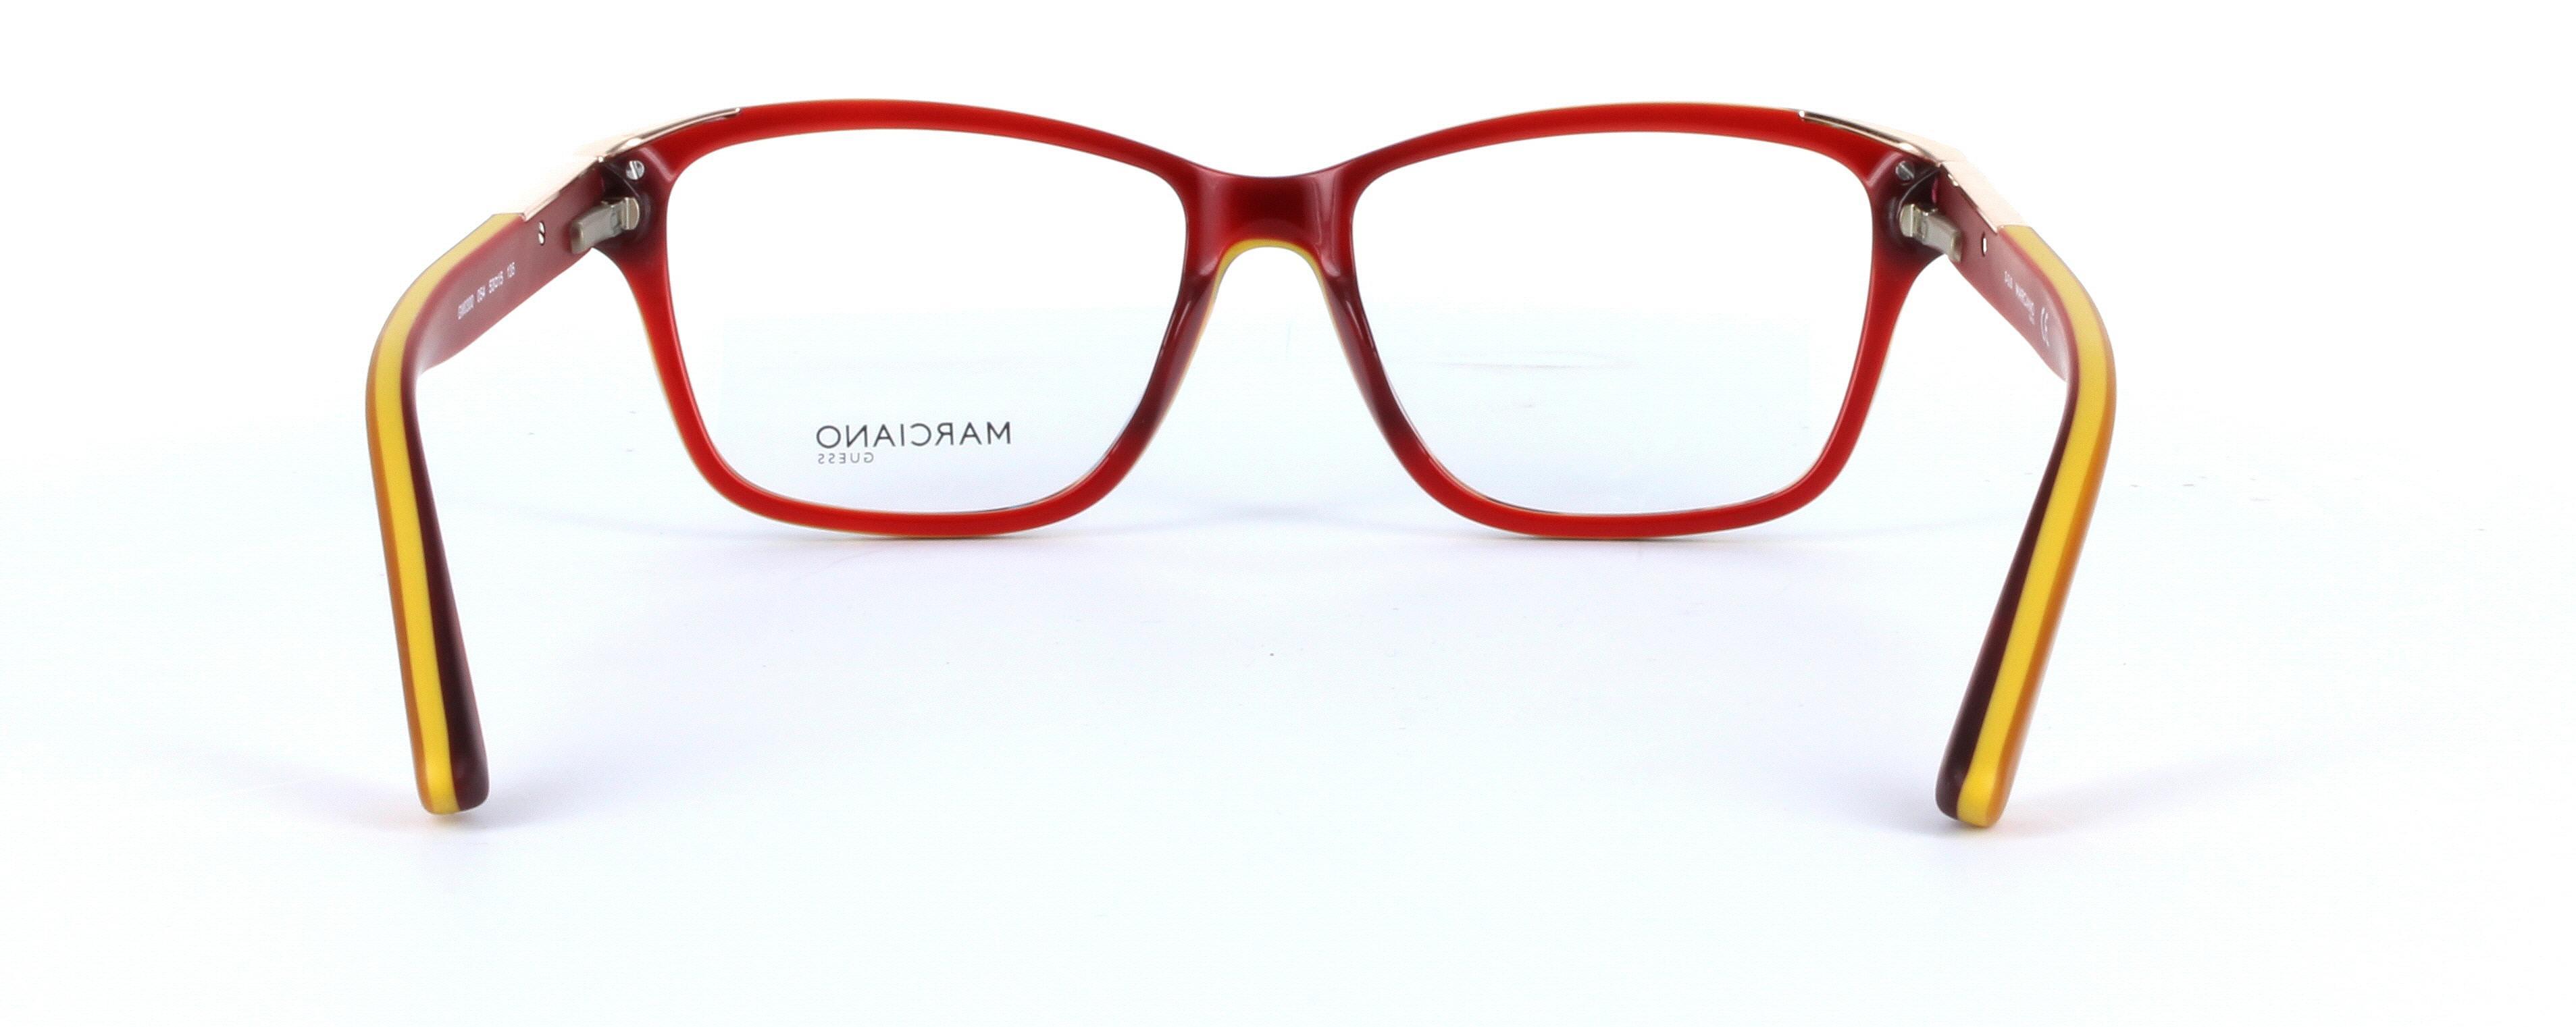 GUESS MARCIANO (GM0300-054) Tortoise Full Rim Oval Rectangular Acetate Glasses - Image View 3